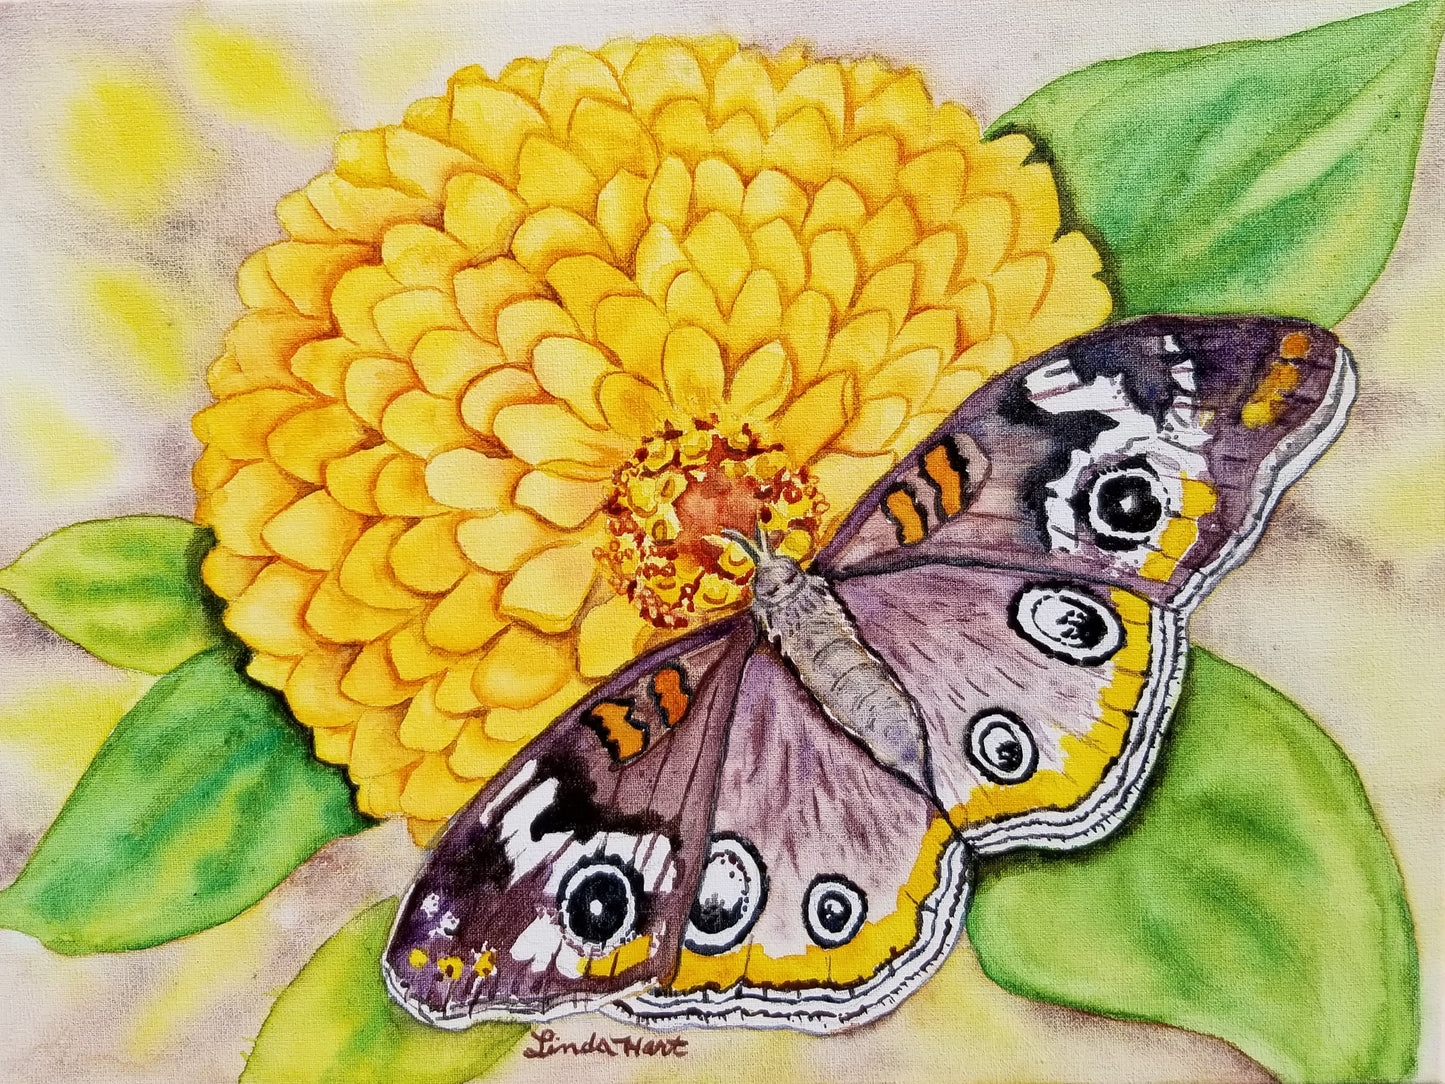 Zinnia and Butterfly - 9" x 12"x 7/8" - Original Watercolor on Canvas